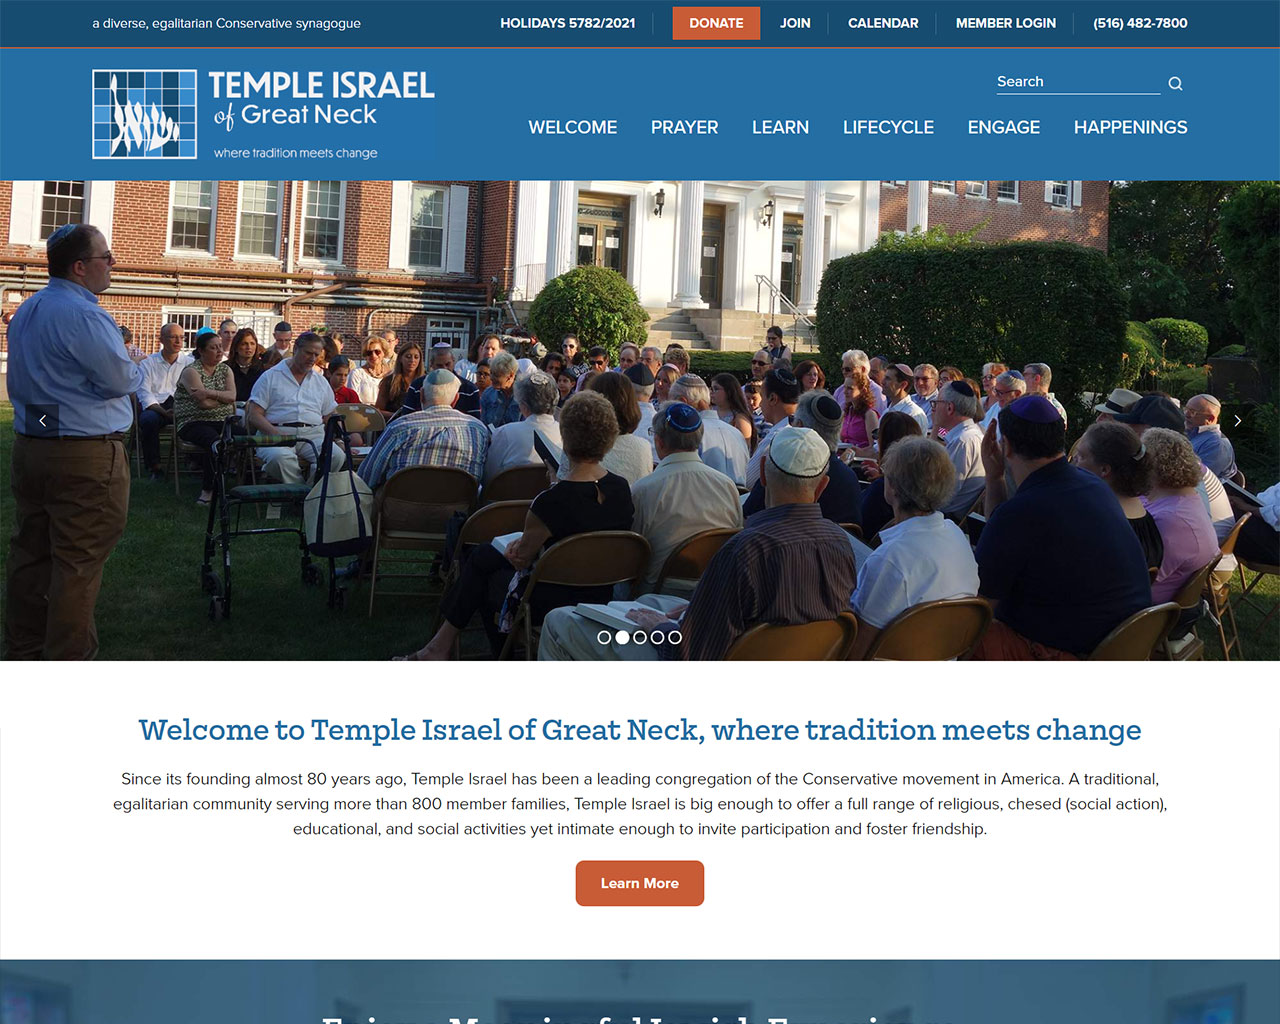 Temple Israel of Great Neck